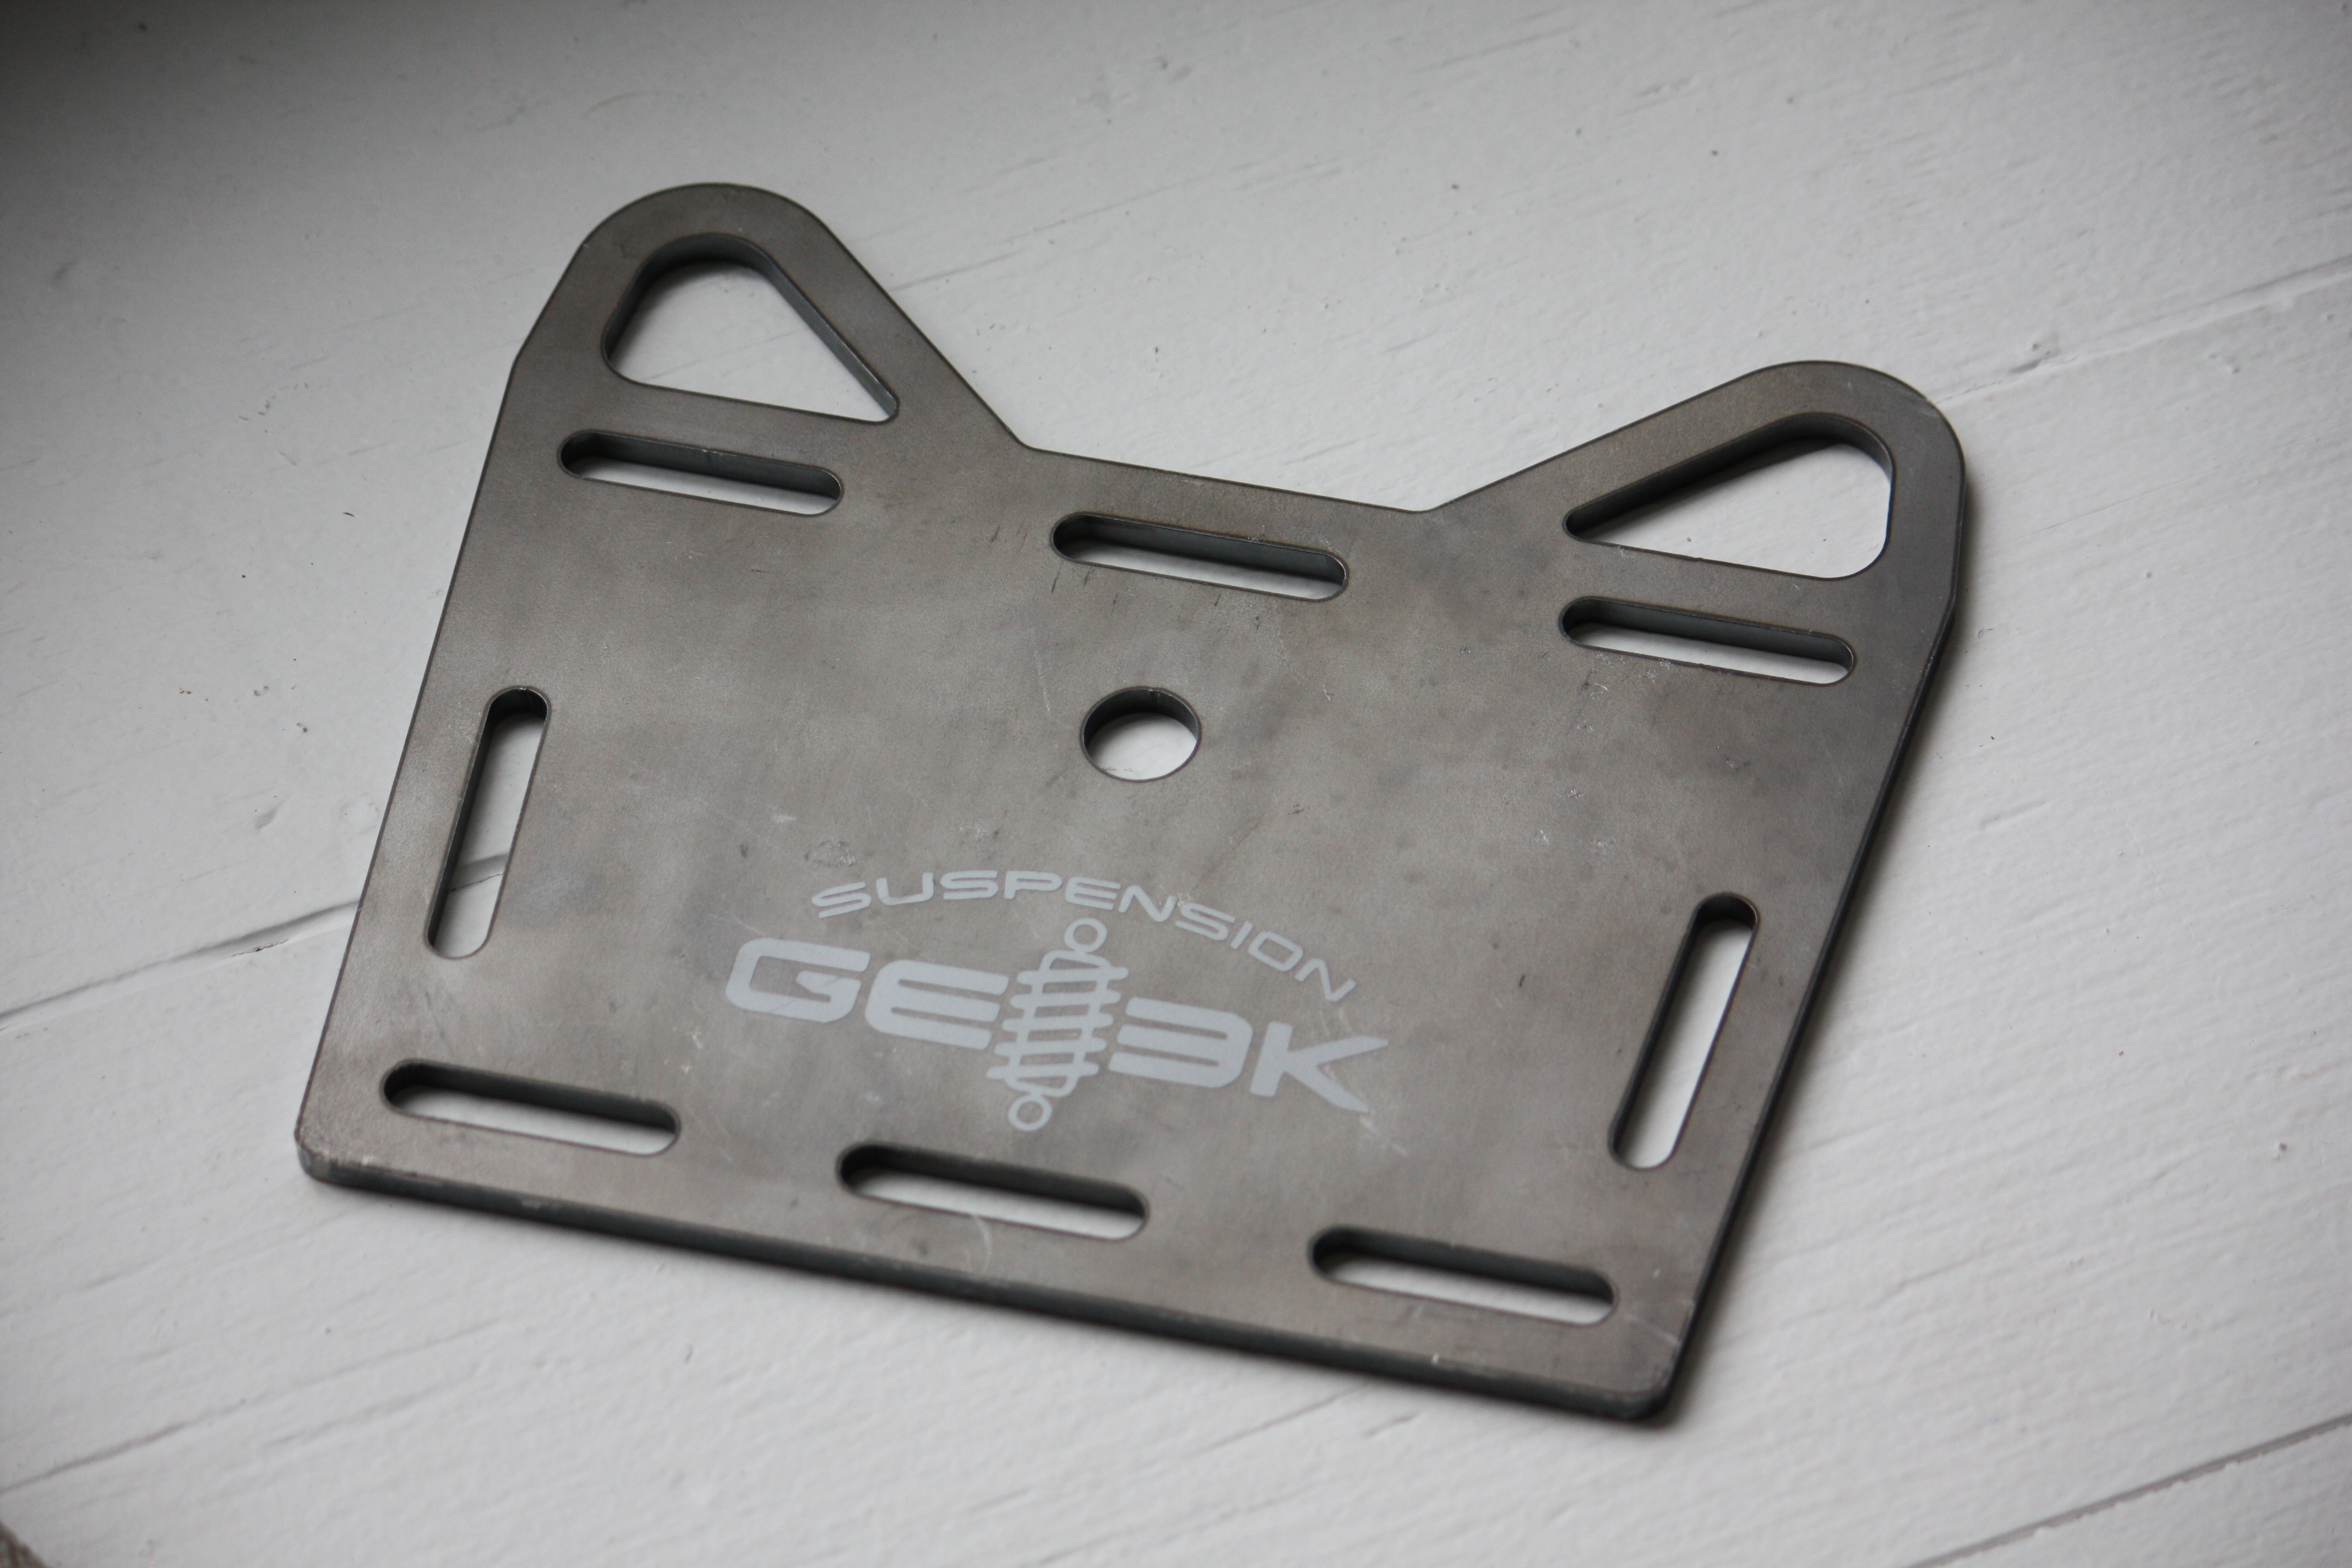 New Product: The Suspension Geek Tow And Jack Plate Is The A Gift From Heaven For Camaro And Nova Owners